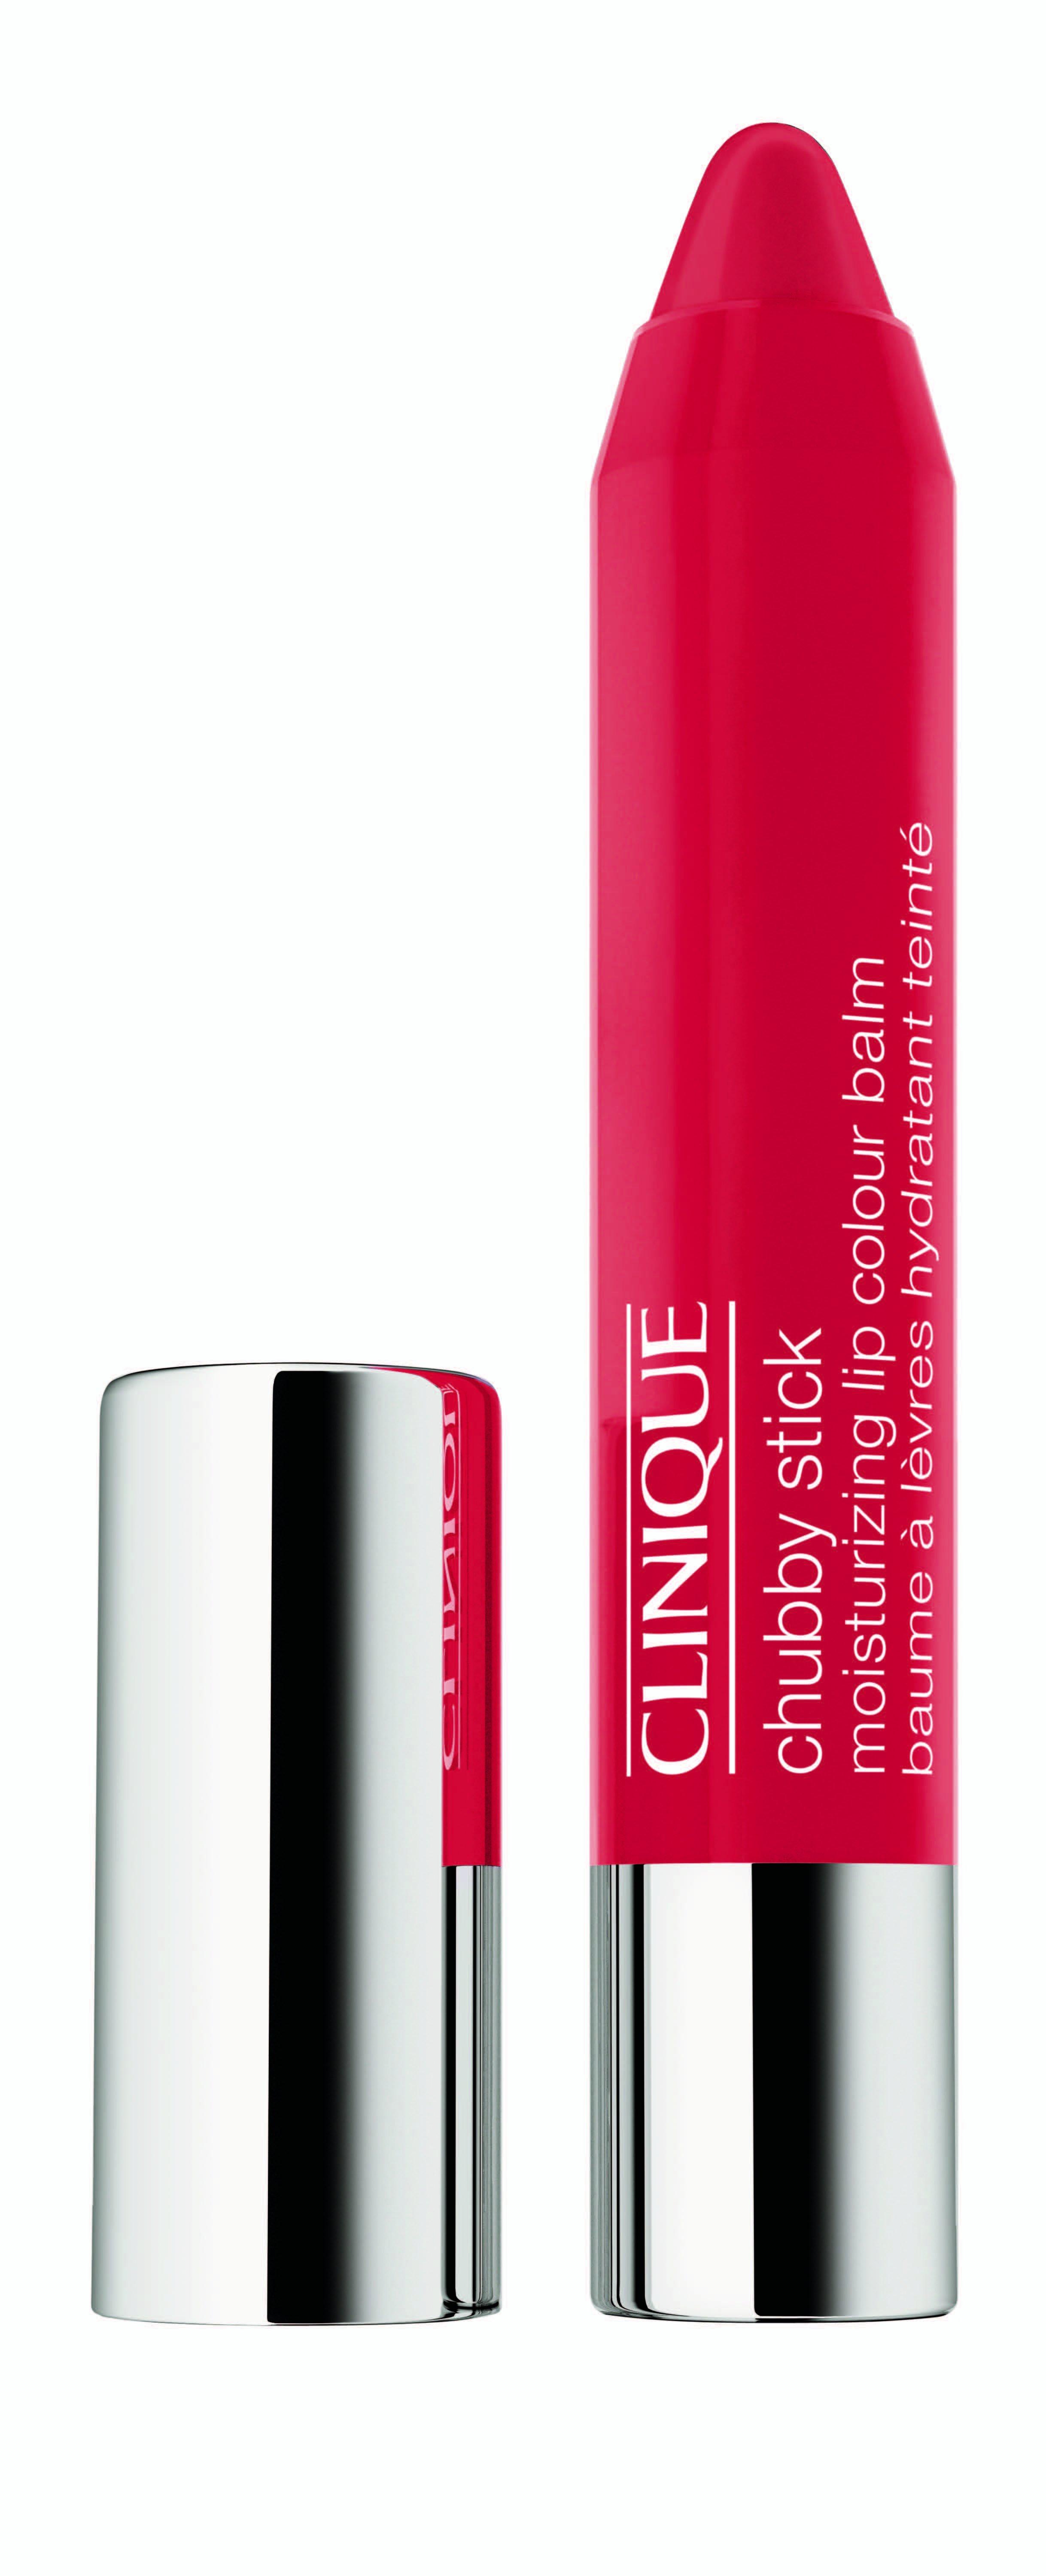 Image of CLINIQUE Chubby Stick Two Ton Tomato - 3g